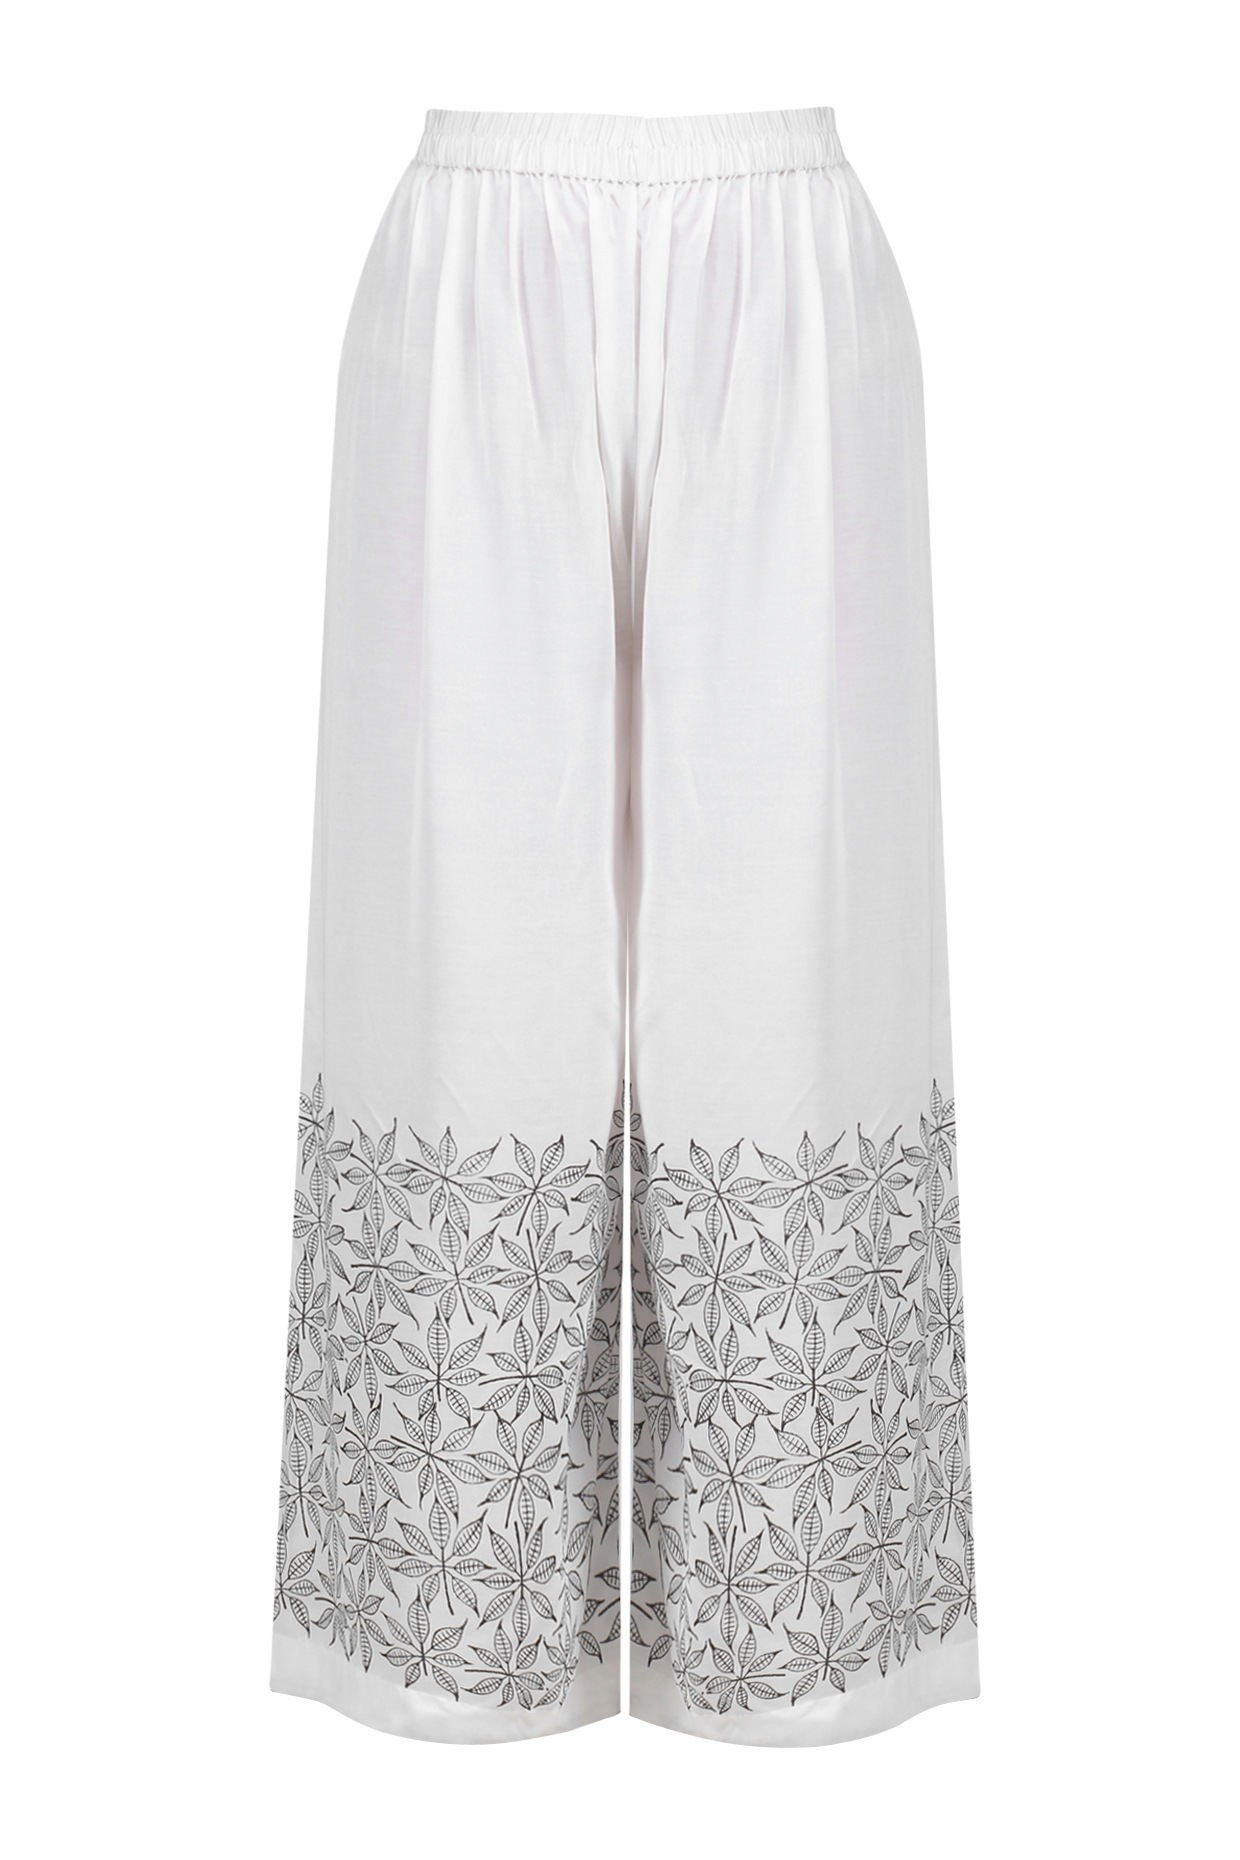 Buy Women Off-White Palazzo Pants With Lace Detailing - RTW - Indya